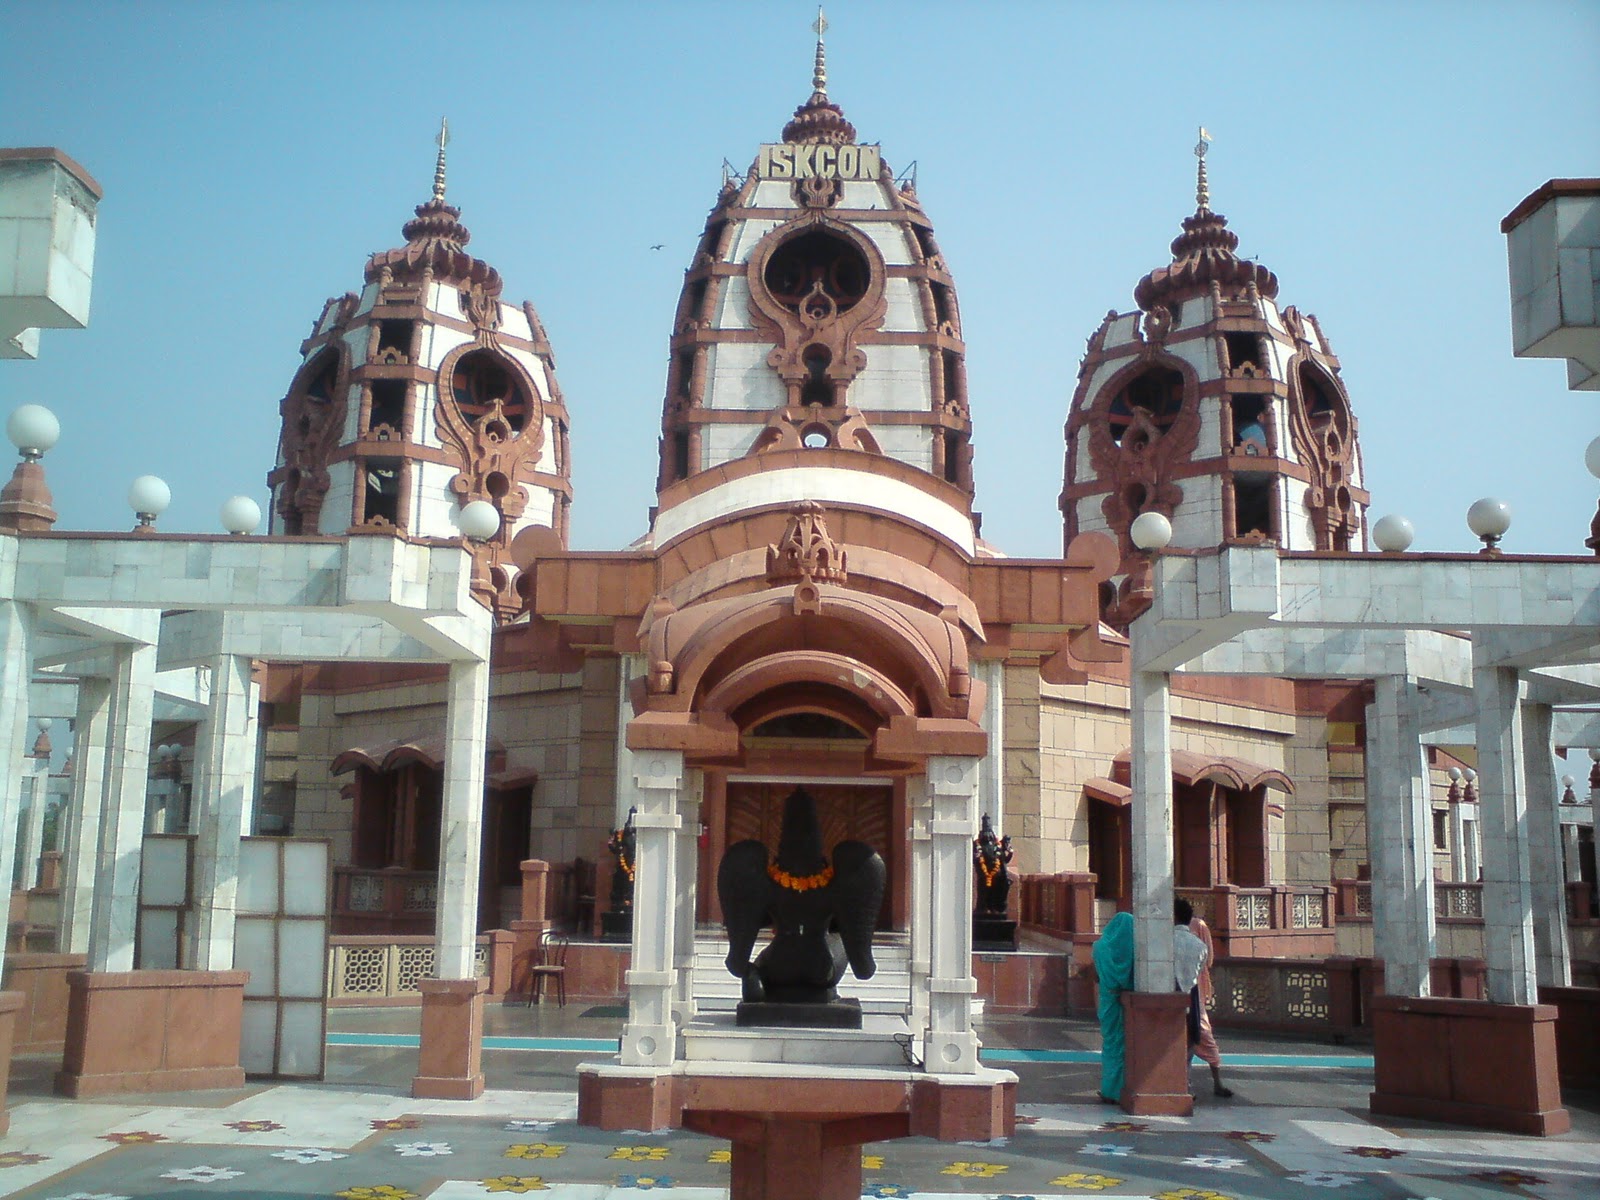 ISKCON TEMPLE - SURAT Photos, Images and Wallpapers - MouthShut.com